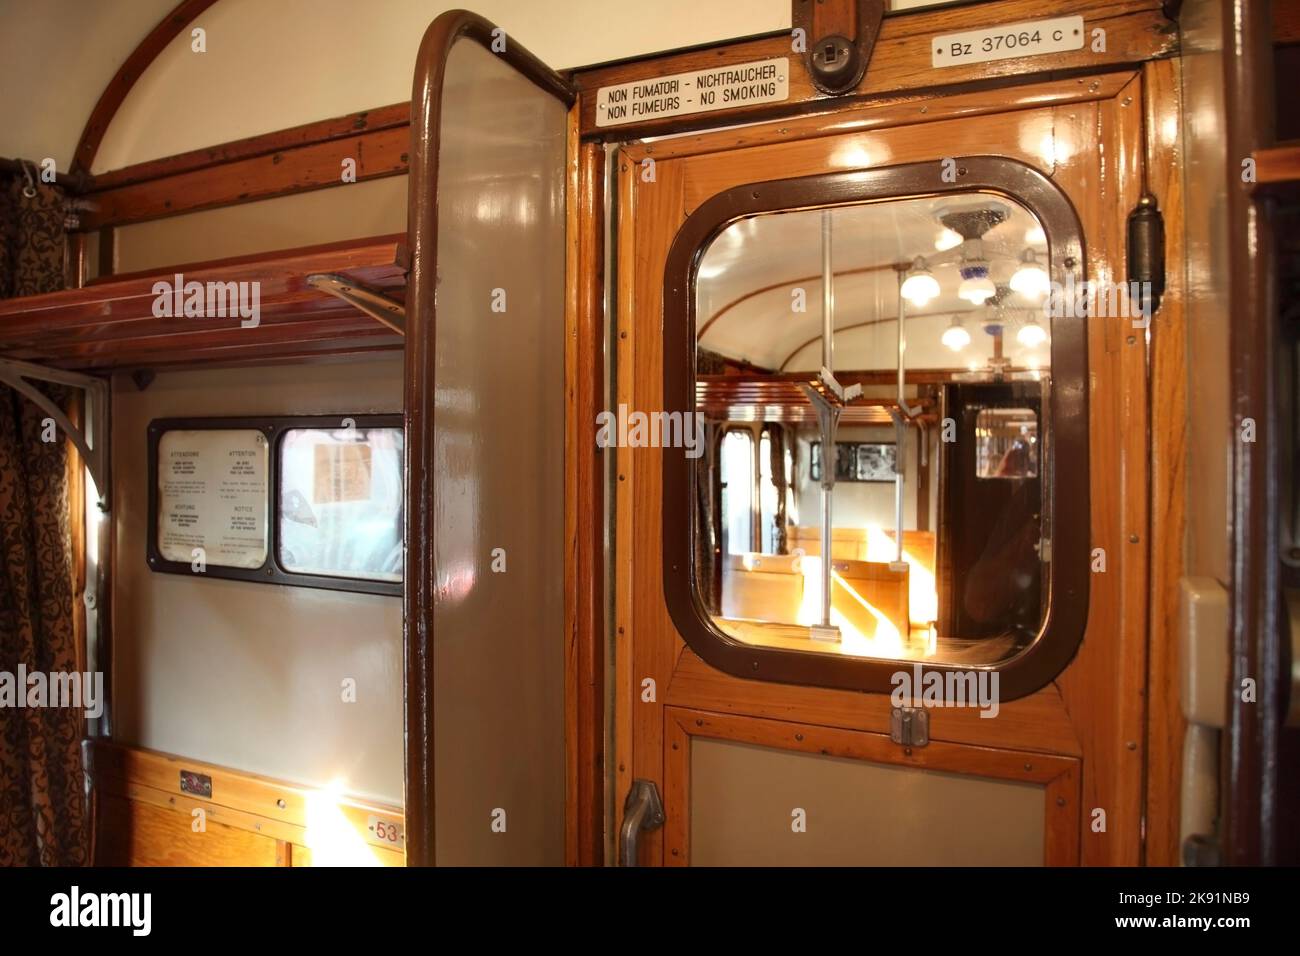 Interior of vintage preserved "Centoporte" Italian Railways train carriage  dating from the 1930s Stock Photo - Alamy